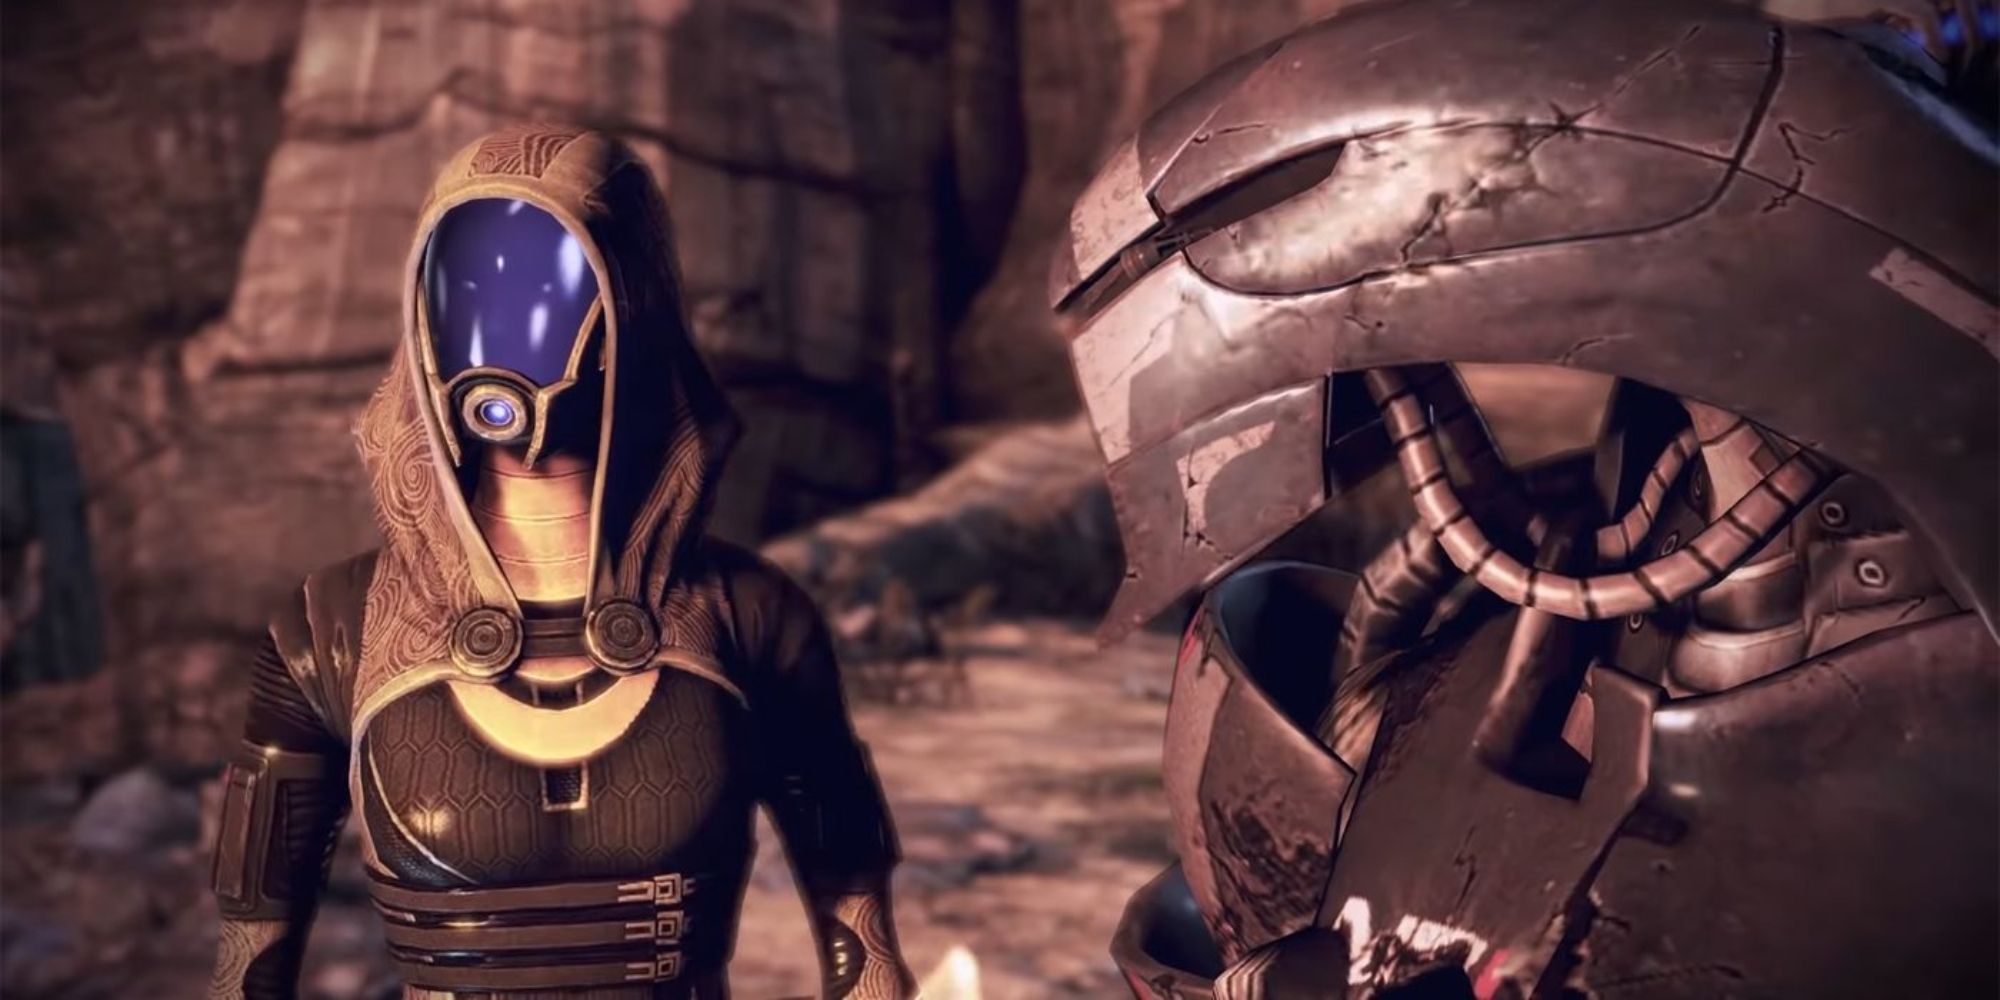 Mass Effect 3 Tali and Legion standing together, close up